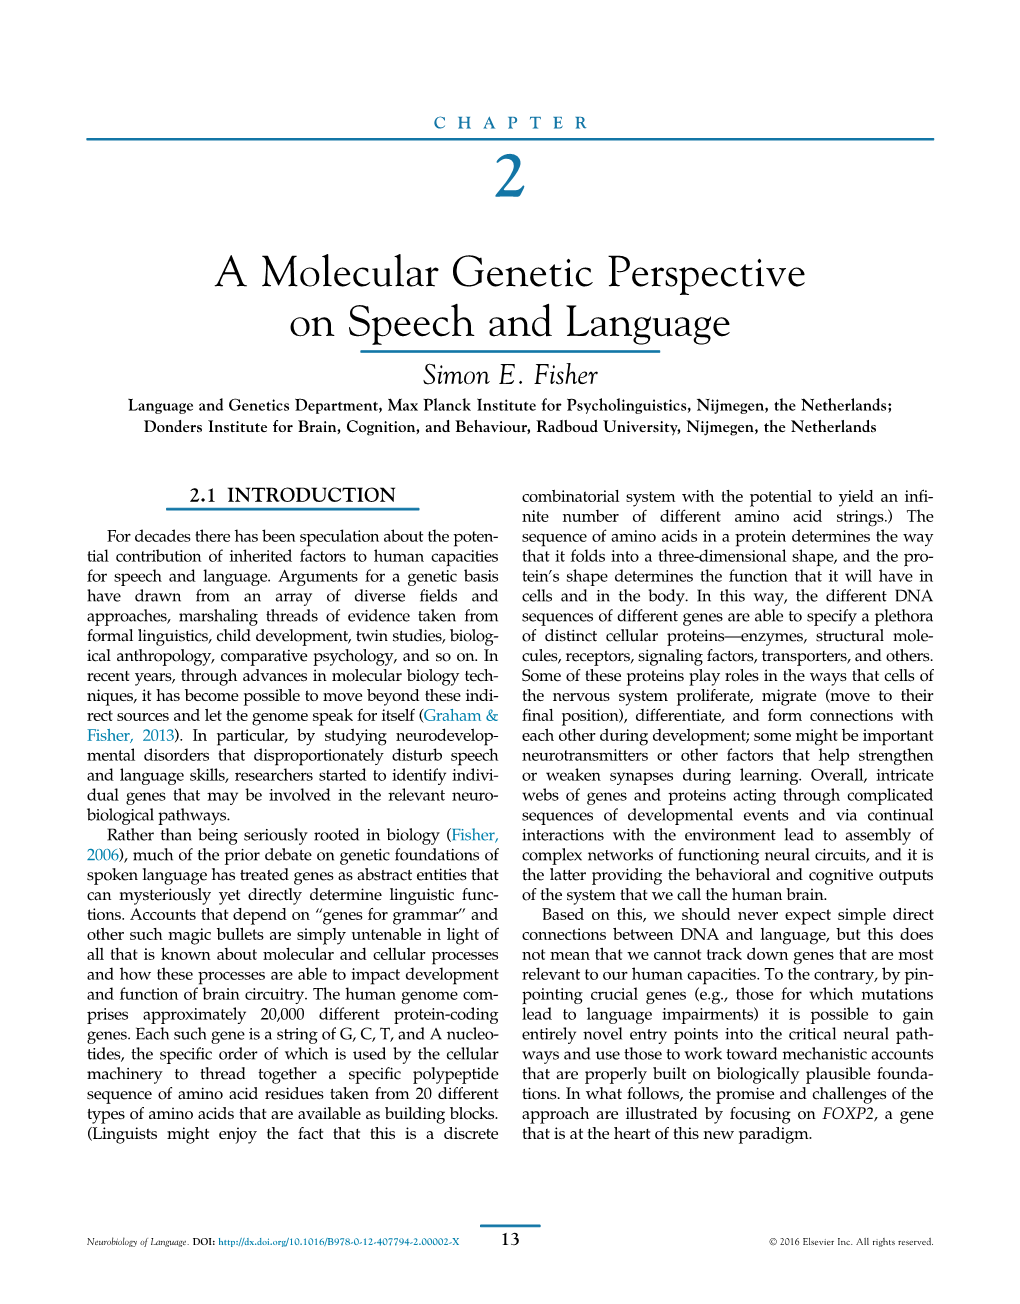 A Molecular Genetic Perspective on Speech and Language Simon E